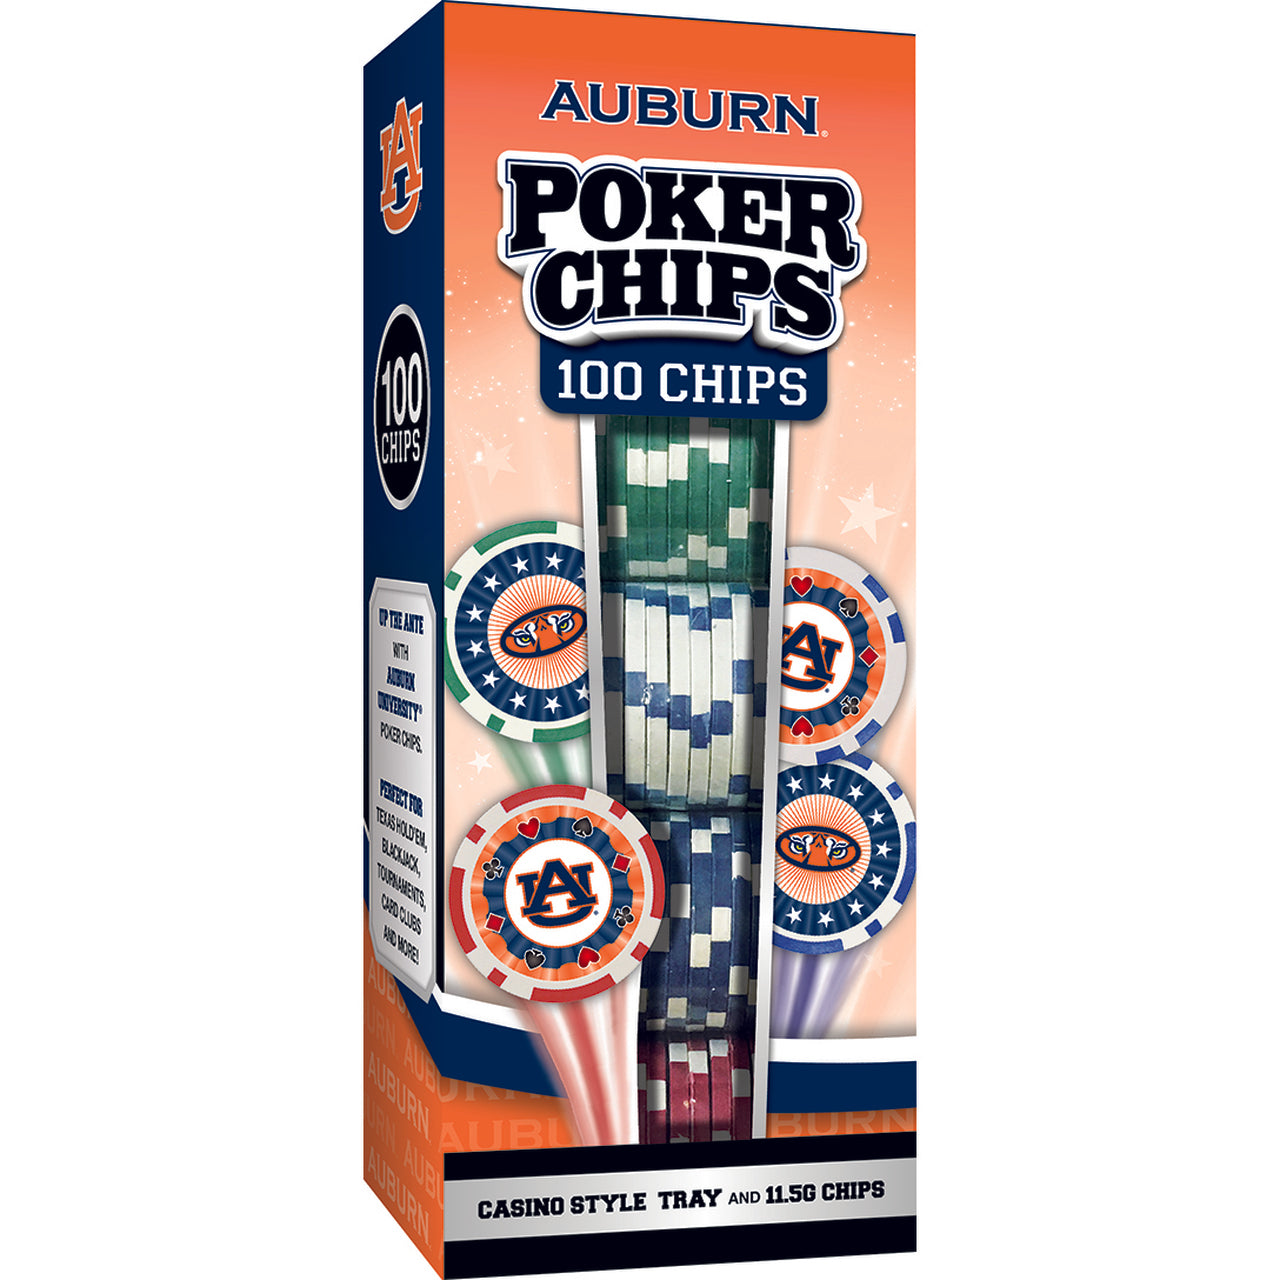 Auburn Tigers Poker Chips 100 Piece Set by Masterpieces